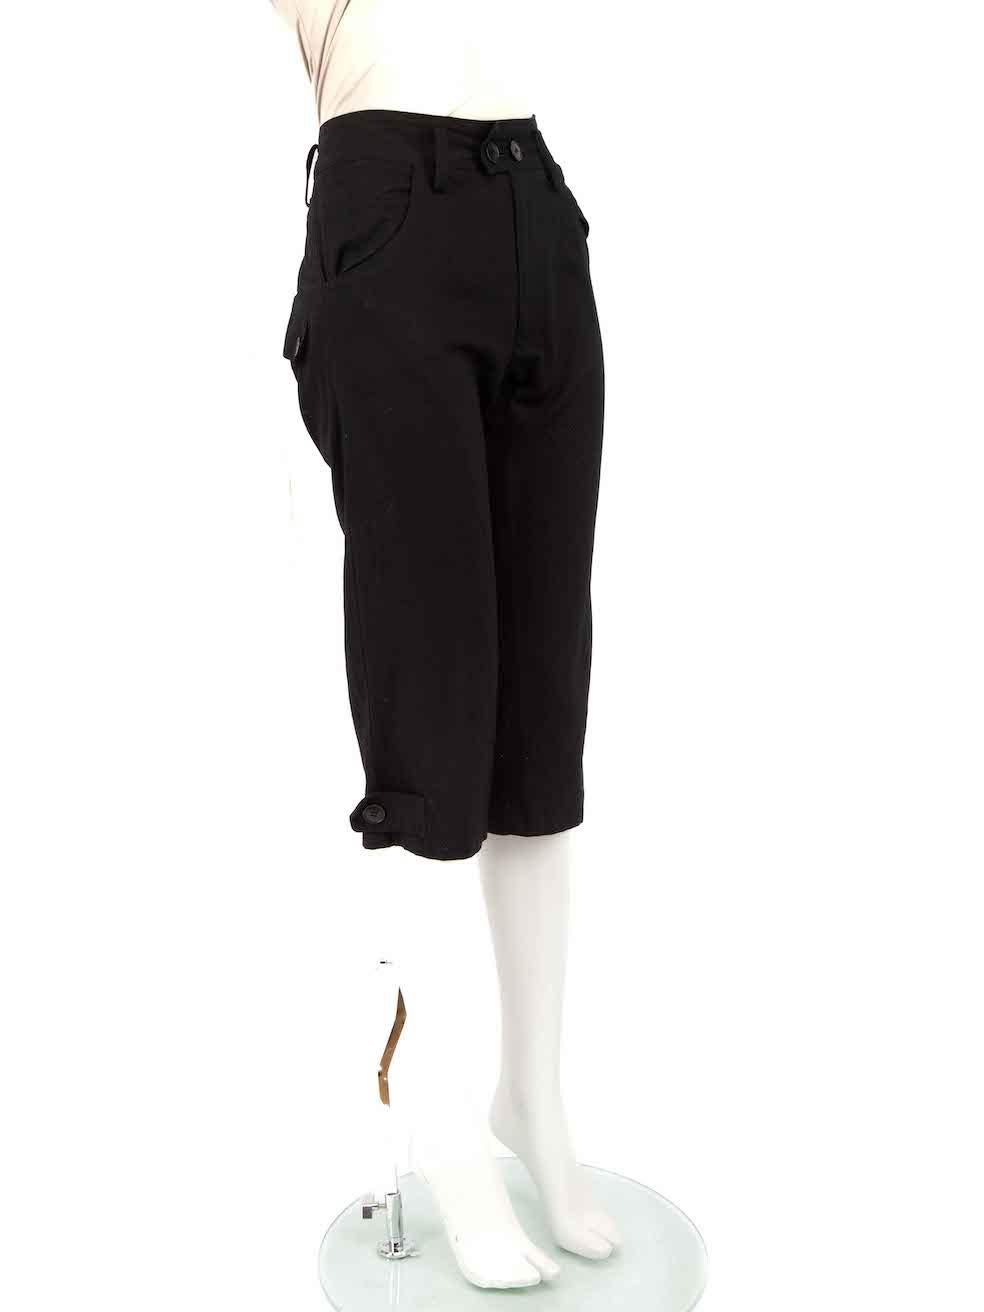 CONDITION is Very good. Hardly any visible wear to trousers is evident on this used Yohji Yamamoto designer resale item.
 
 
 
 Details
 
 
 Black
 
 Cotton
 
 Trousers
 
 Cropped fit
 
 Straight leg
 
 2x Side pockets
 
 2x Back pockets
 
 Fly zip